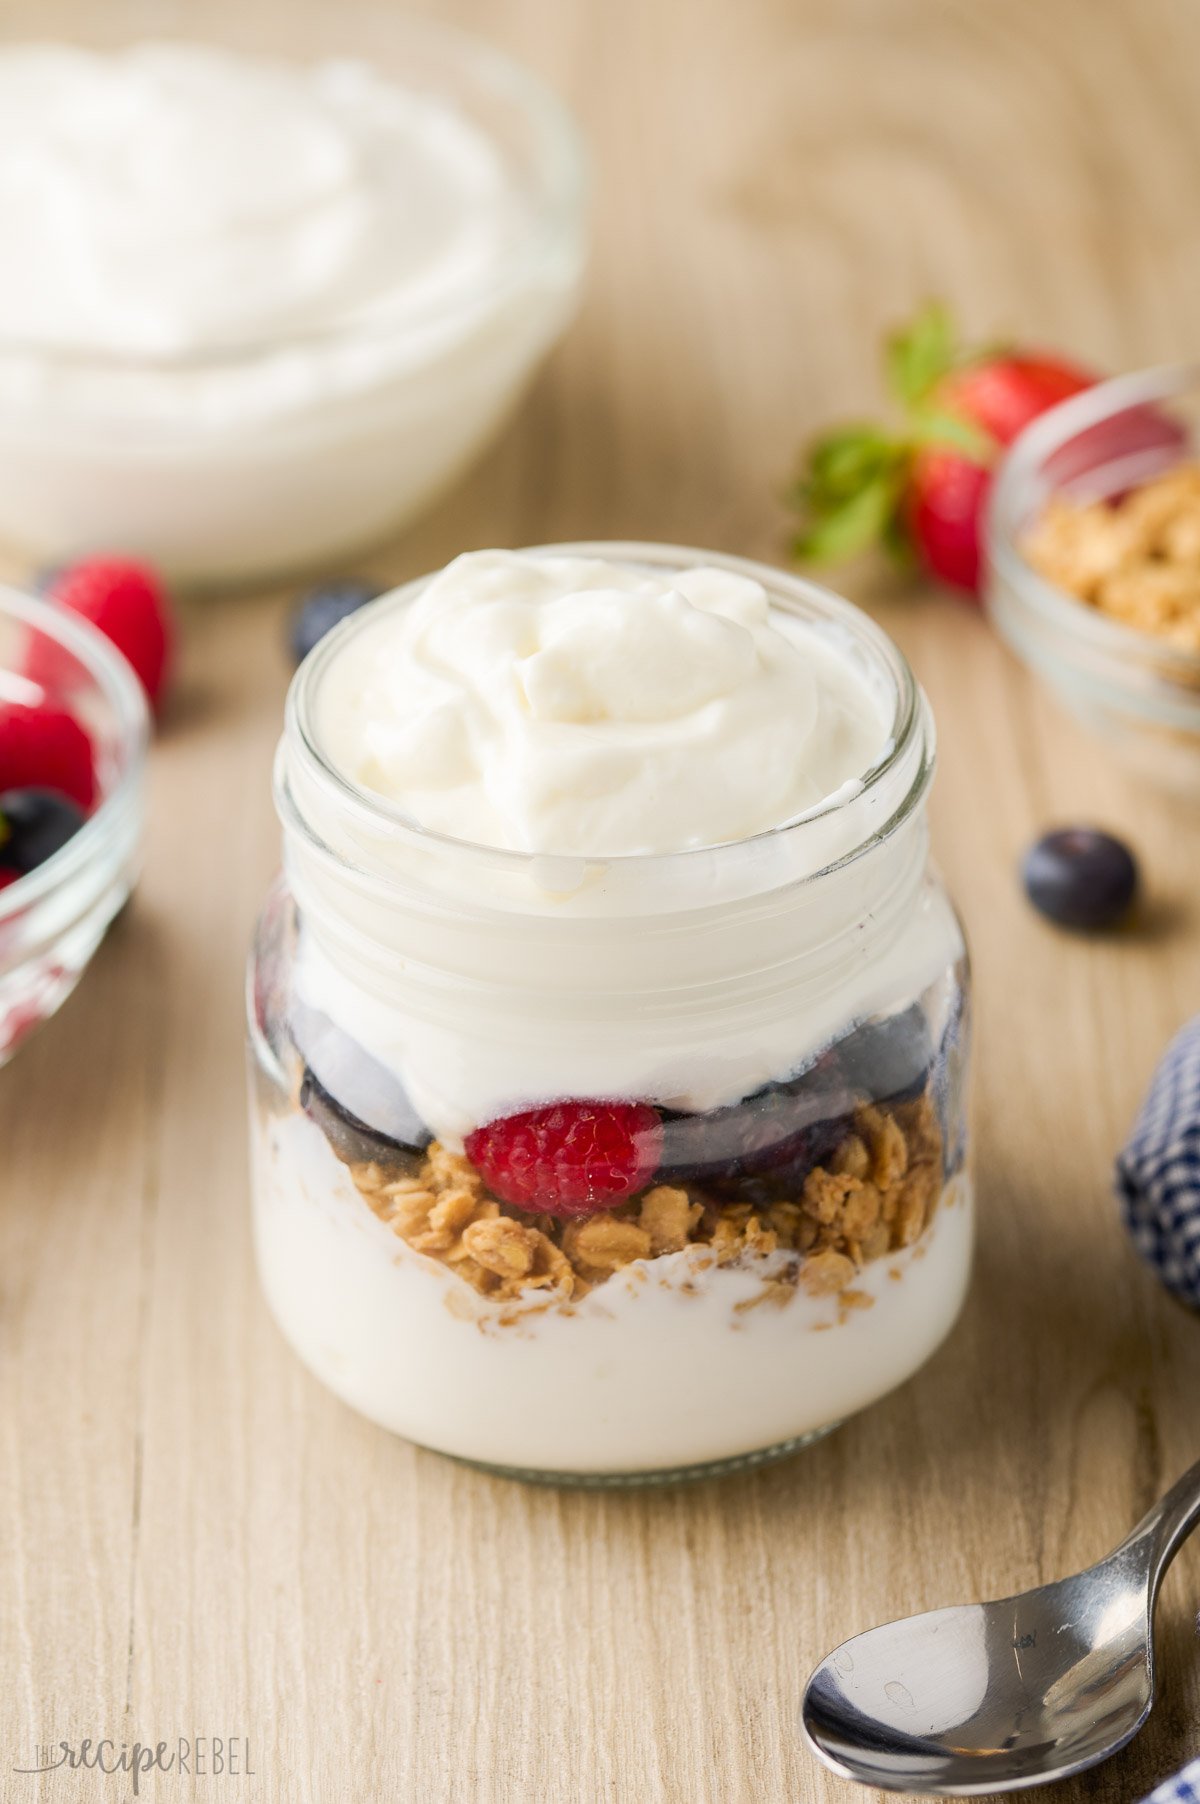 parfait ingredients layered in small glass jar ready for granola.